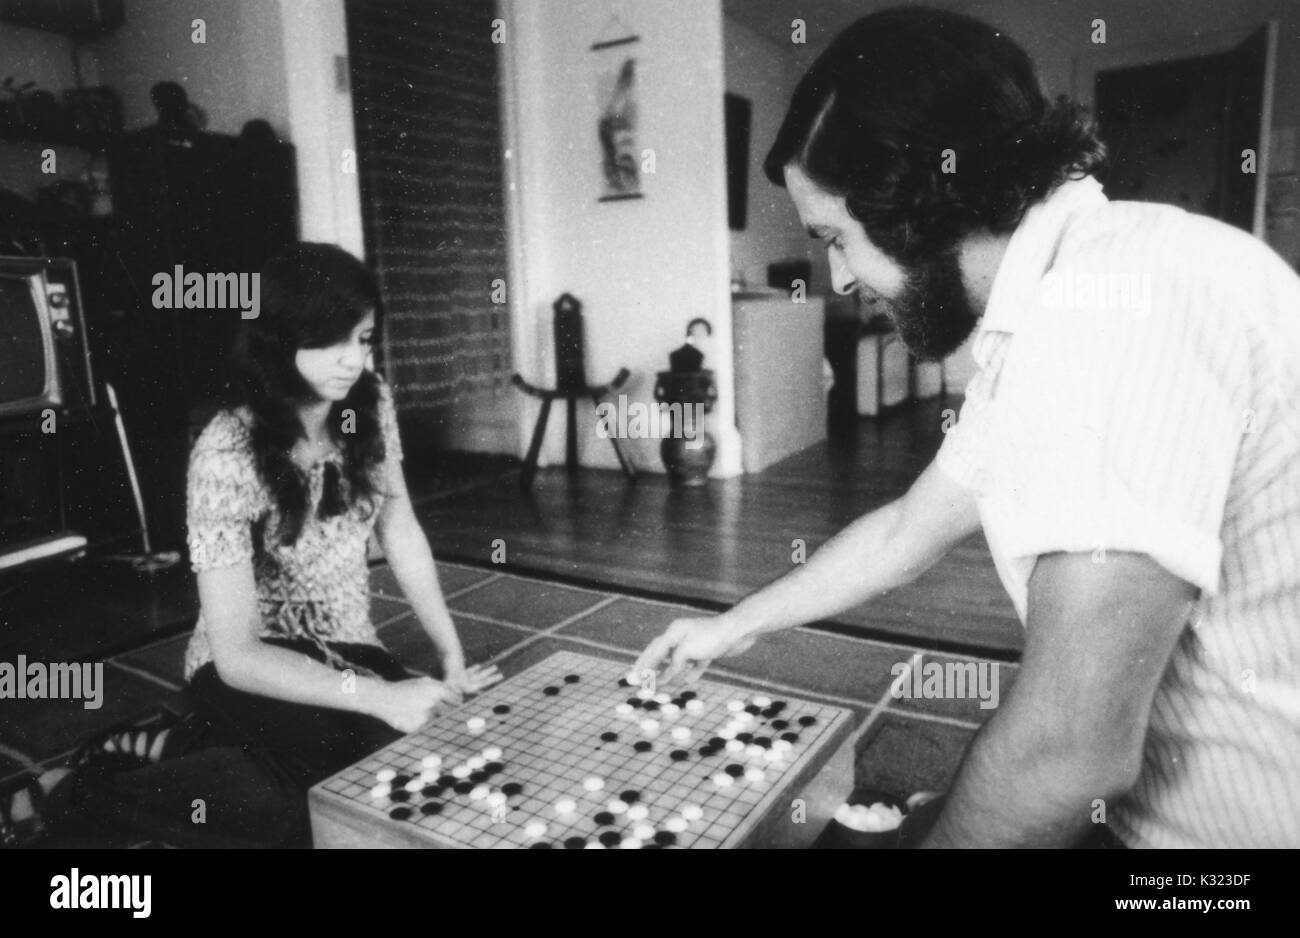 A male and female student sit on opposite sides of a grid board engaged in a game of Go, an old Asian strategy game, with white and black stones arranged on the grid, 1970. Stock Photo